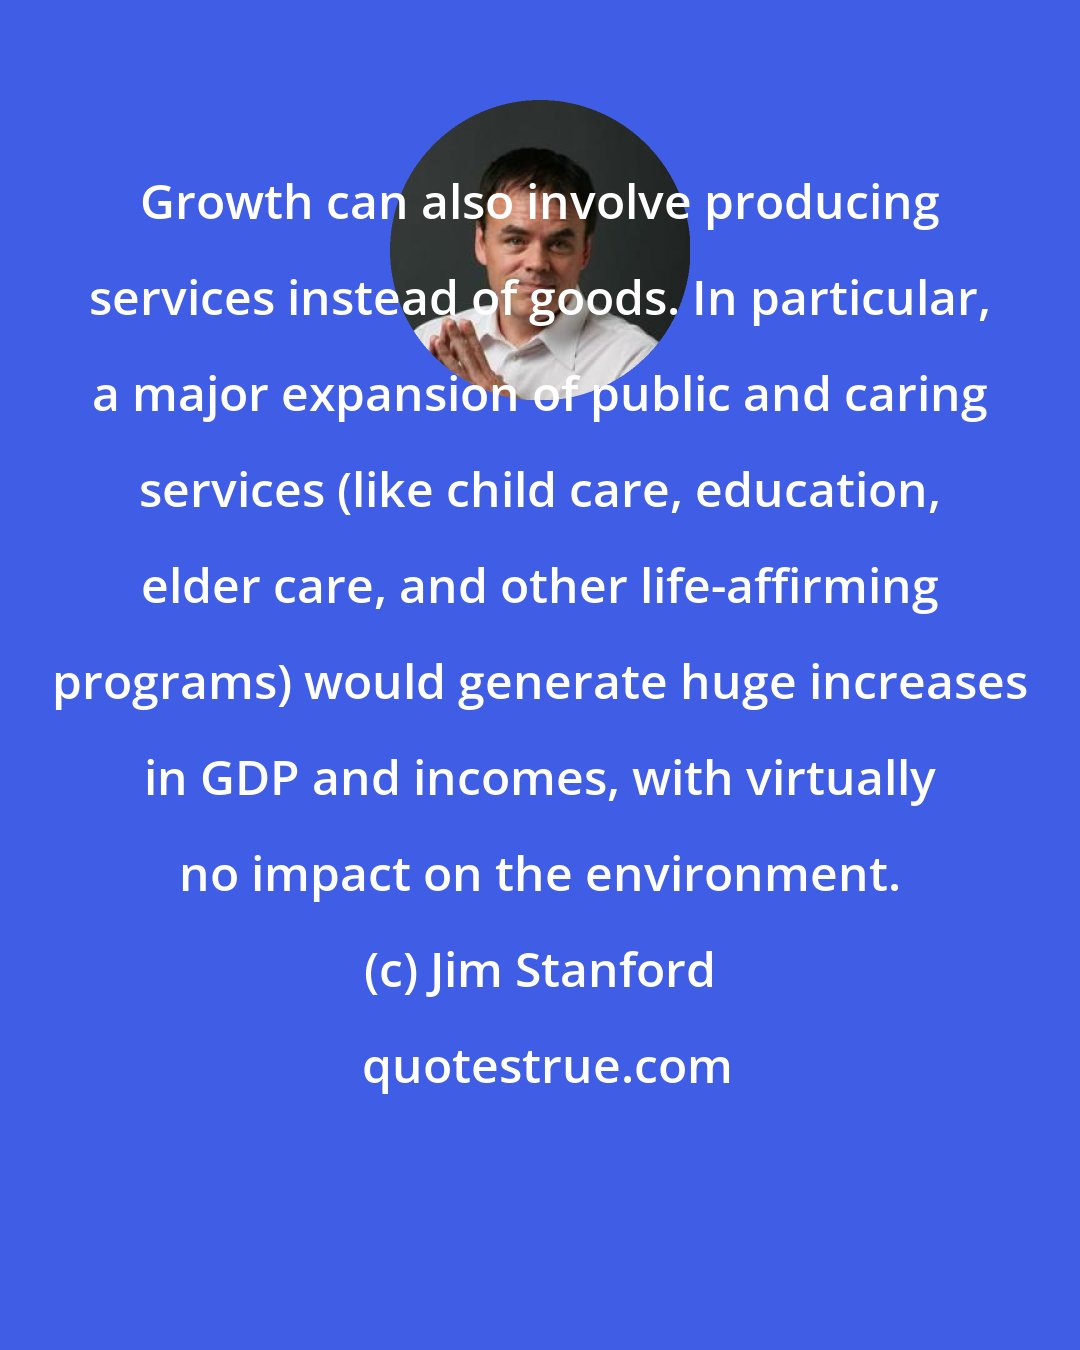 Jim Stanford: Growth can also involve producing services instead of goods. In particular, a major expansion of public and caring services (like child care, education, elder care, and other life-affirming programs) would generate huge increases in GDP and incomes, with virtually no impact on the environment.